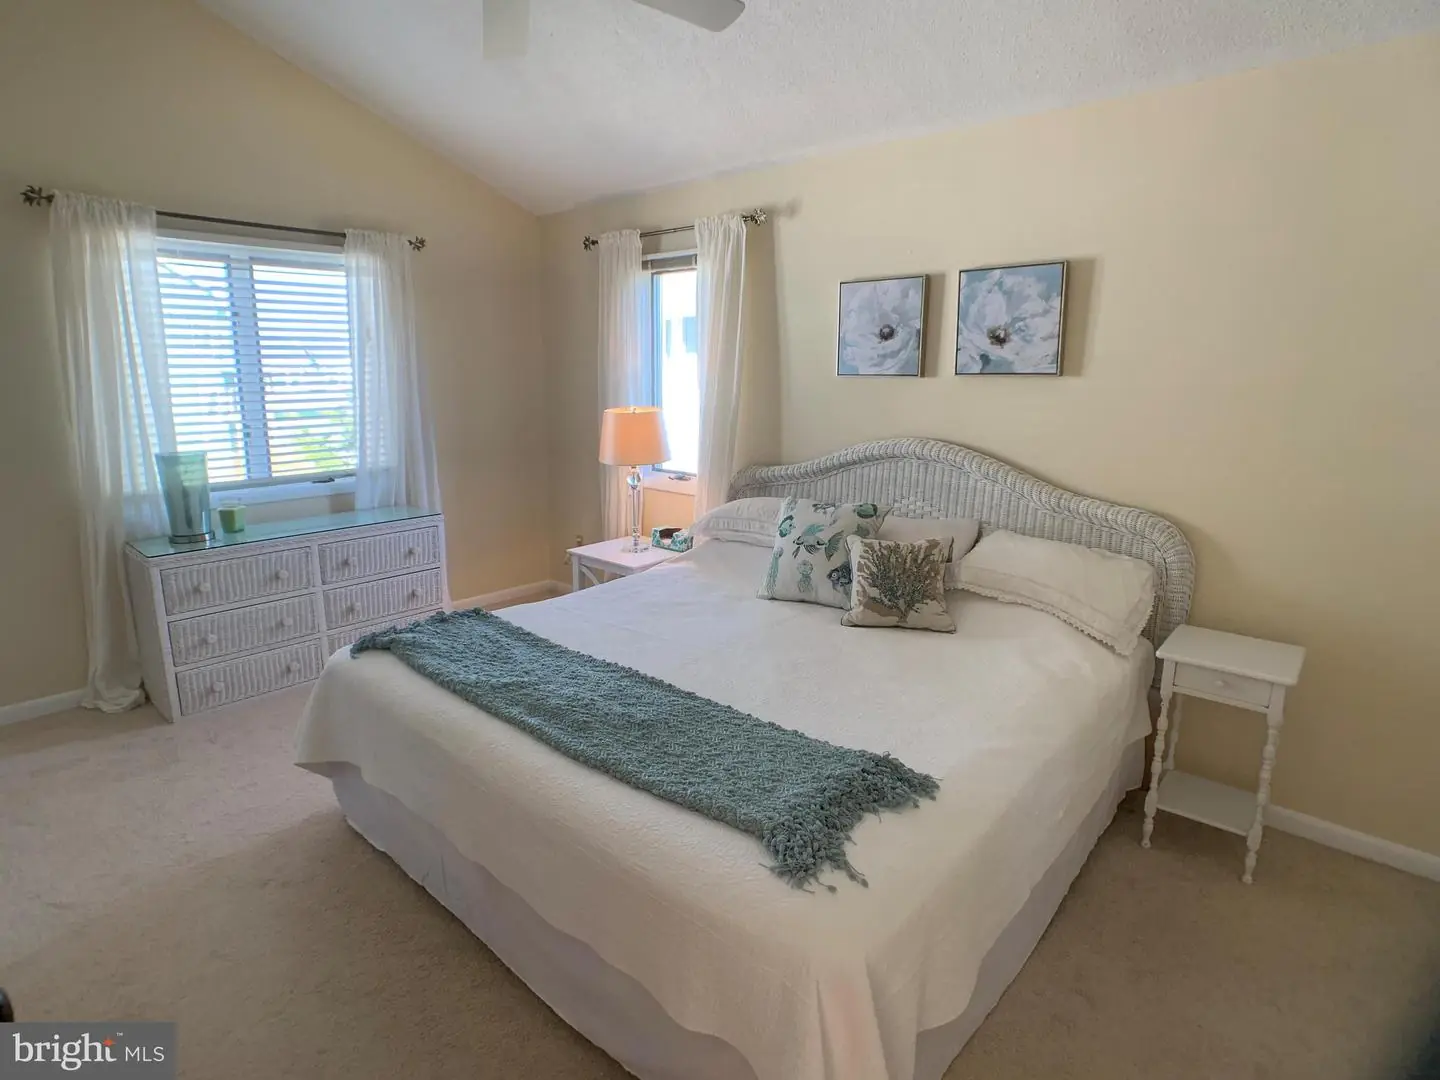 DESU164670-304207560365-2021-07-17-02-03-15 35199 Hassell Ave | Bethany Beach, DE Real Estate For Sale | MLS# Desu164670  - 1st Choice Properties